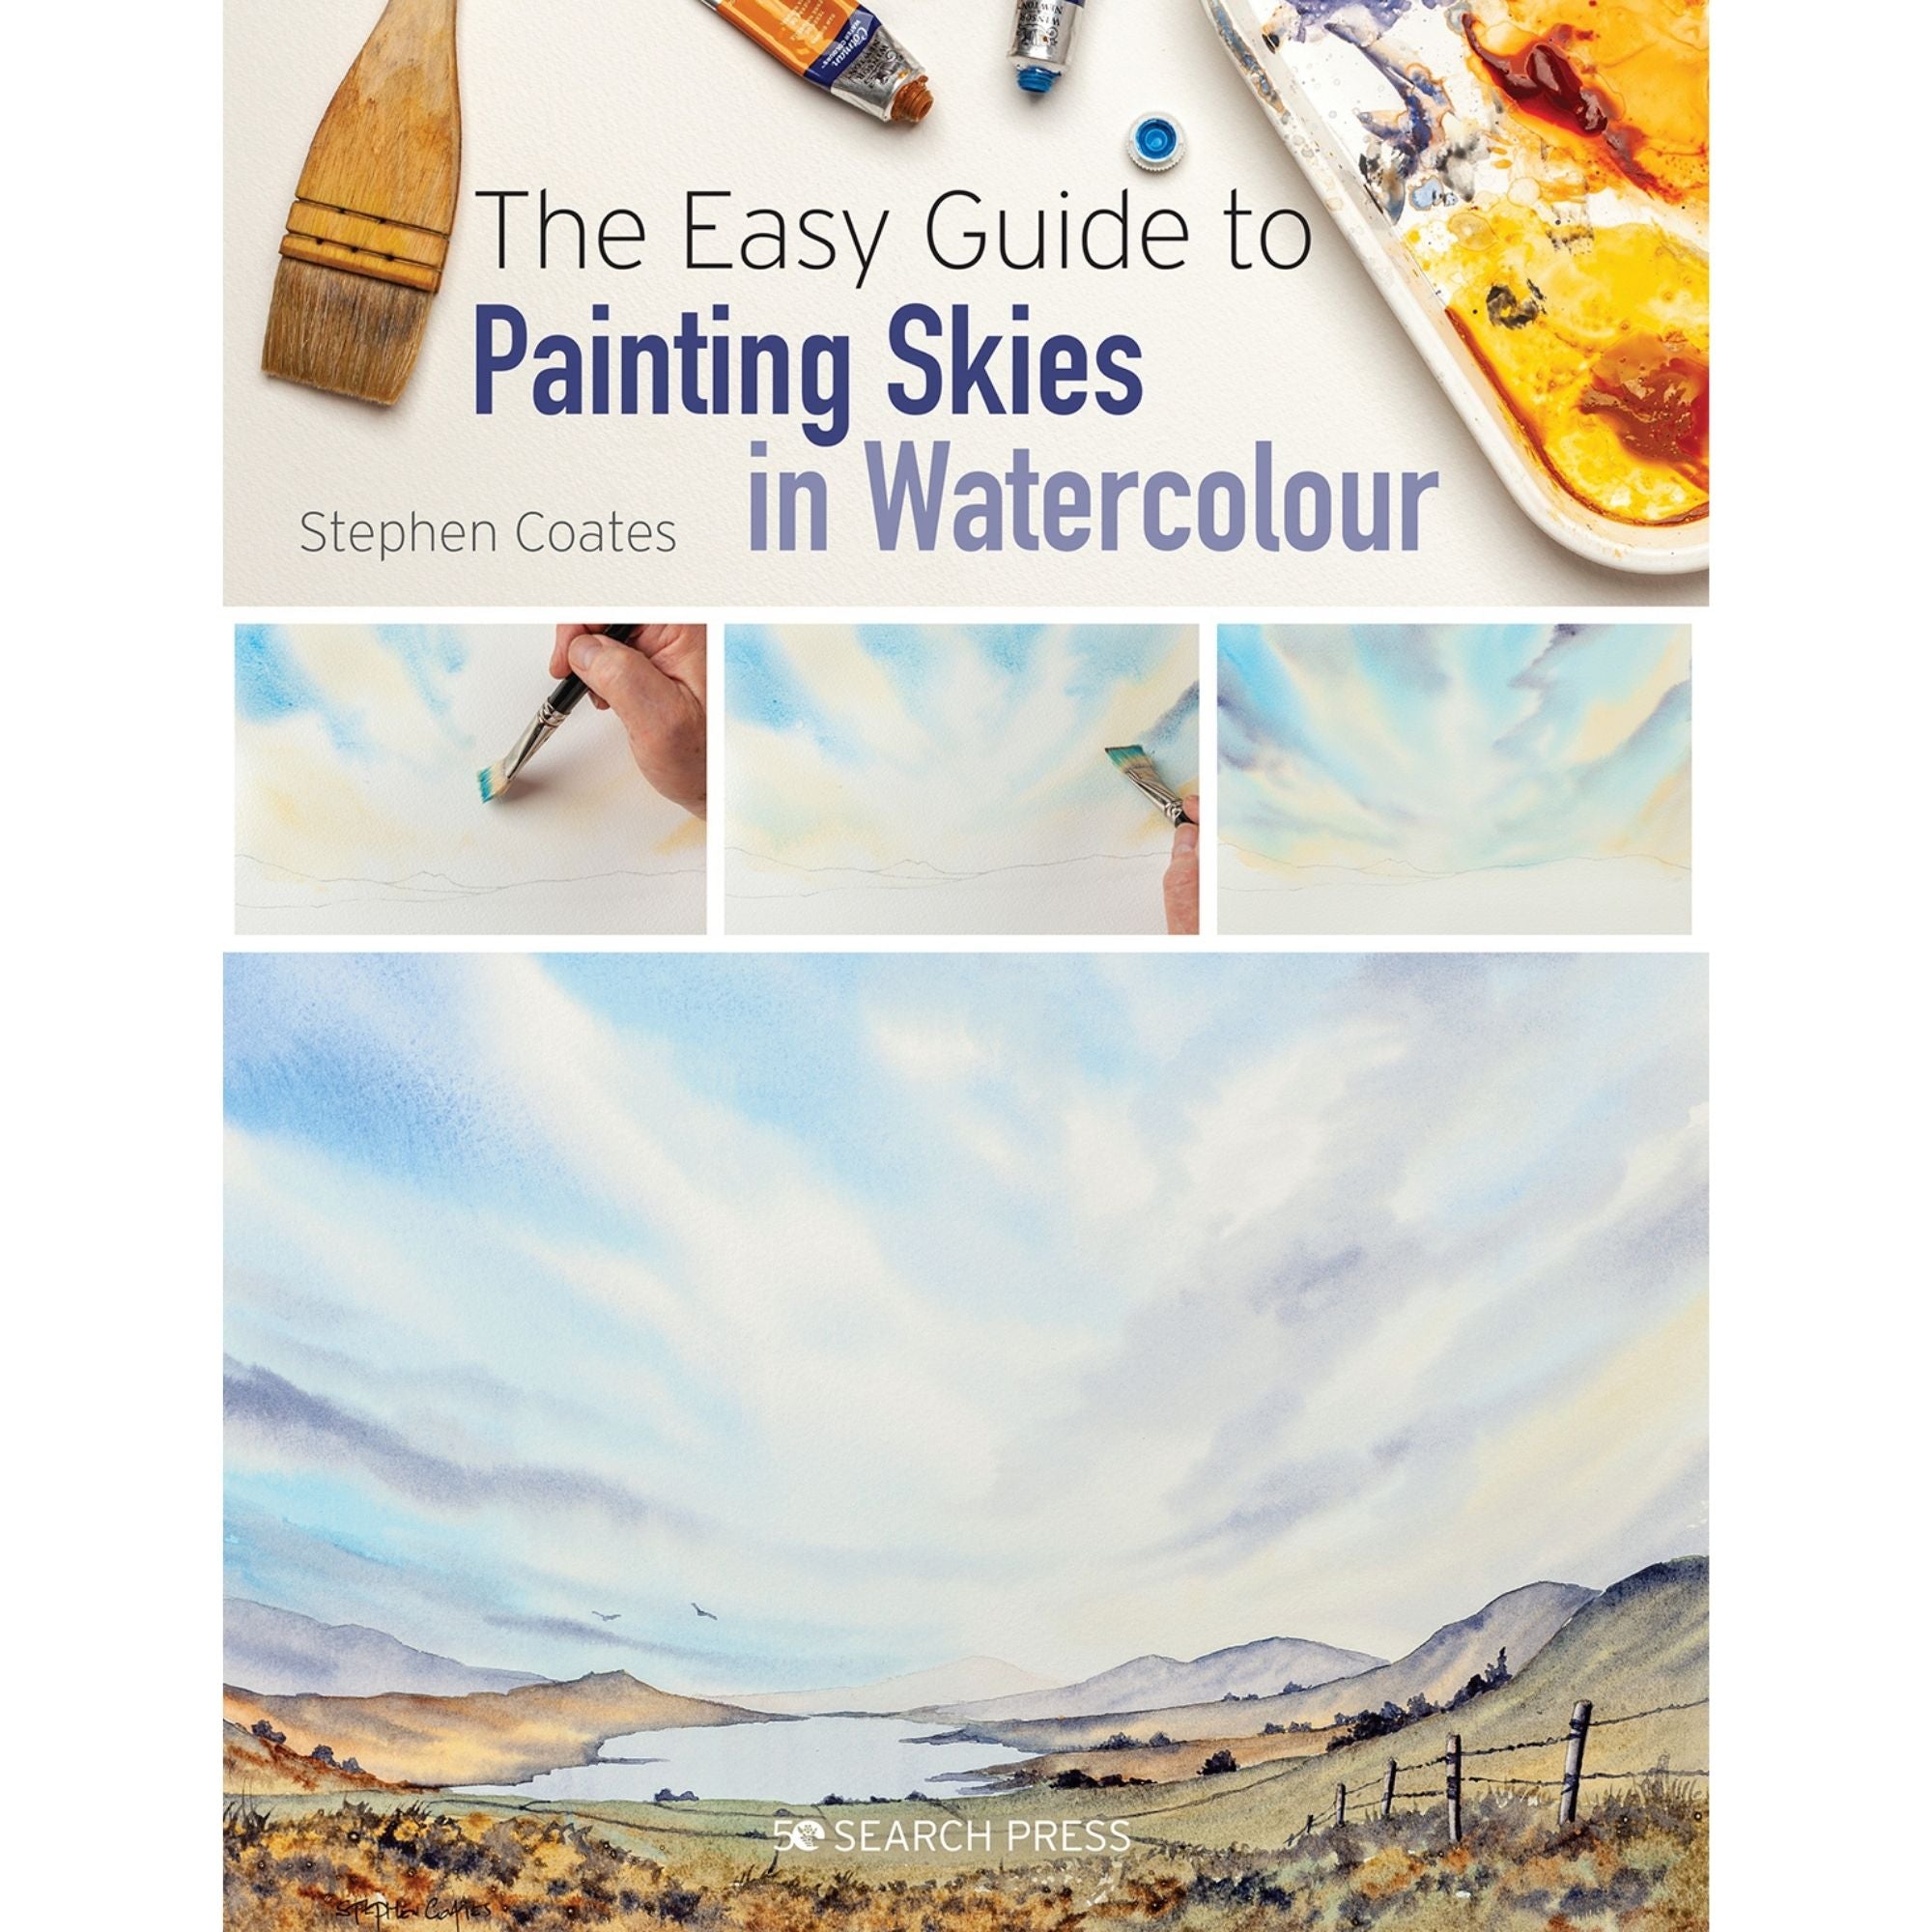 The Easy Guide to Painting Skies in Watercolour - S. Coates